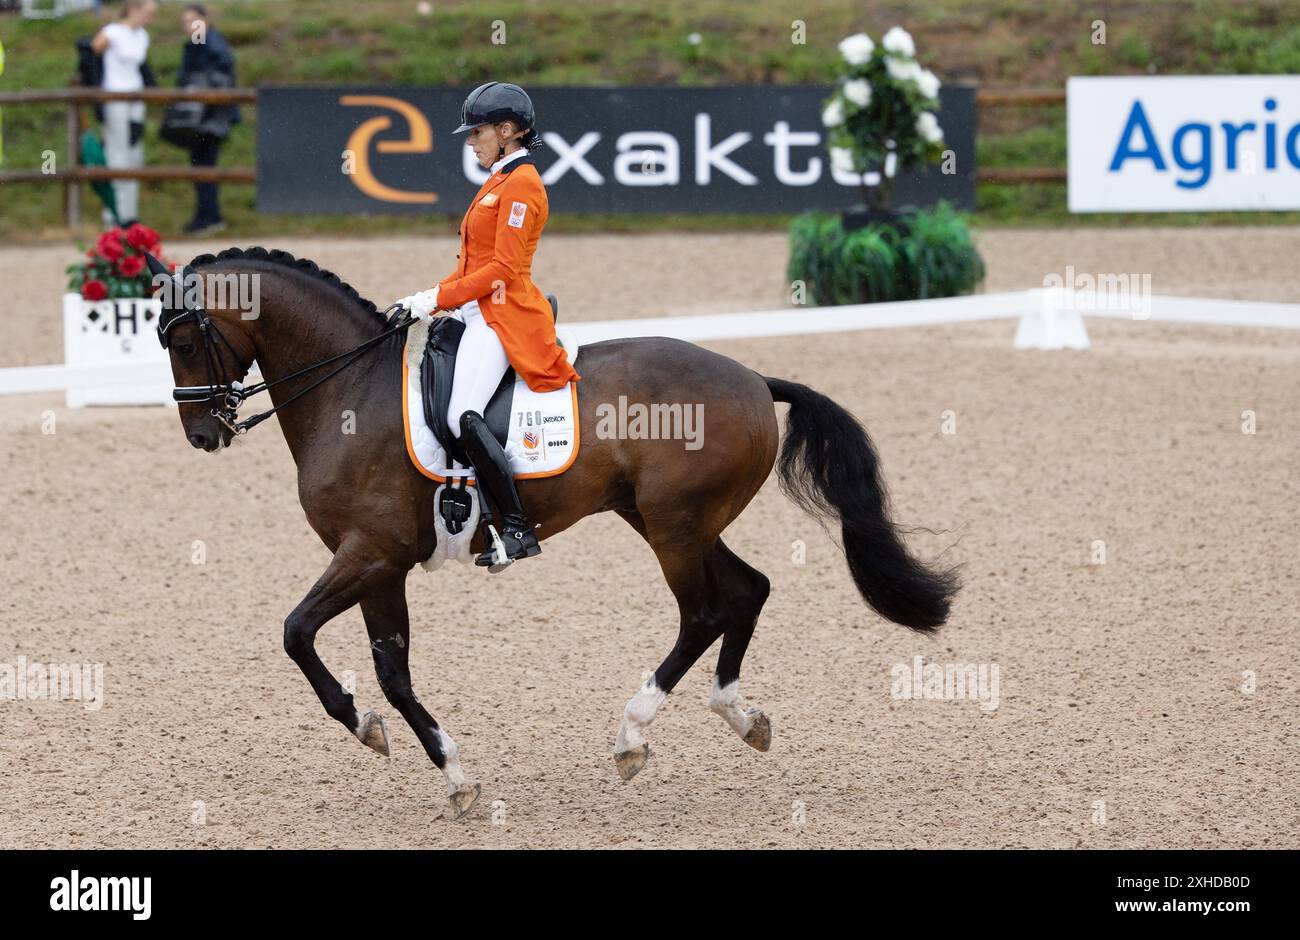 Gerdine Marie (NED) with the horse Holiday in the FEI Dressage Nations Cup Grand Prix during the Falsterbo Horse Show, Sweden. 13th July, 2024. Photo: Andreas Hillergren/TT/Code 10600 Credit: TT News Agency/Alamy Live News Stock Photo